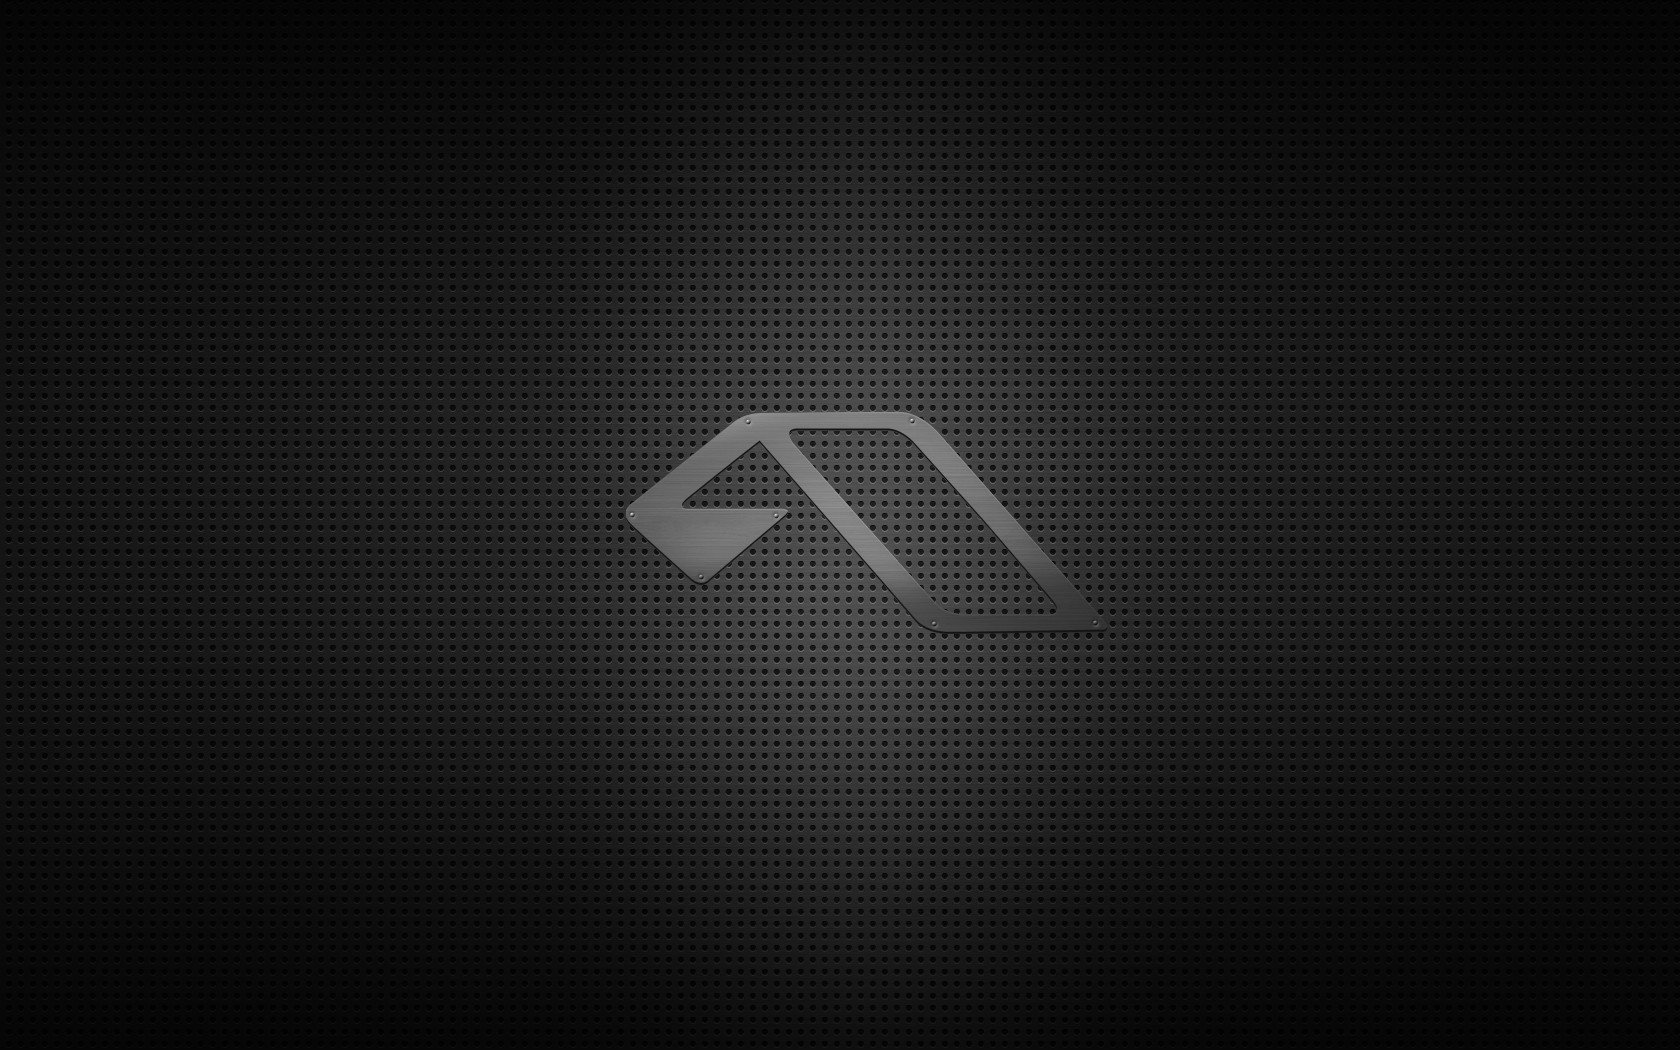 Anjunabeats Images | Photos, videos, logos, illustrations and branding on  Behance